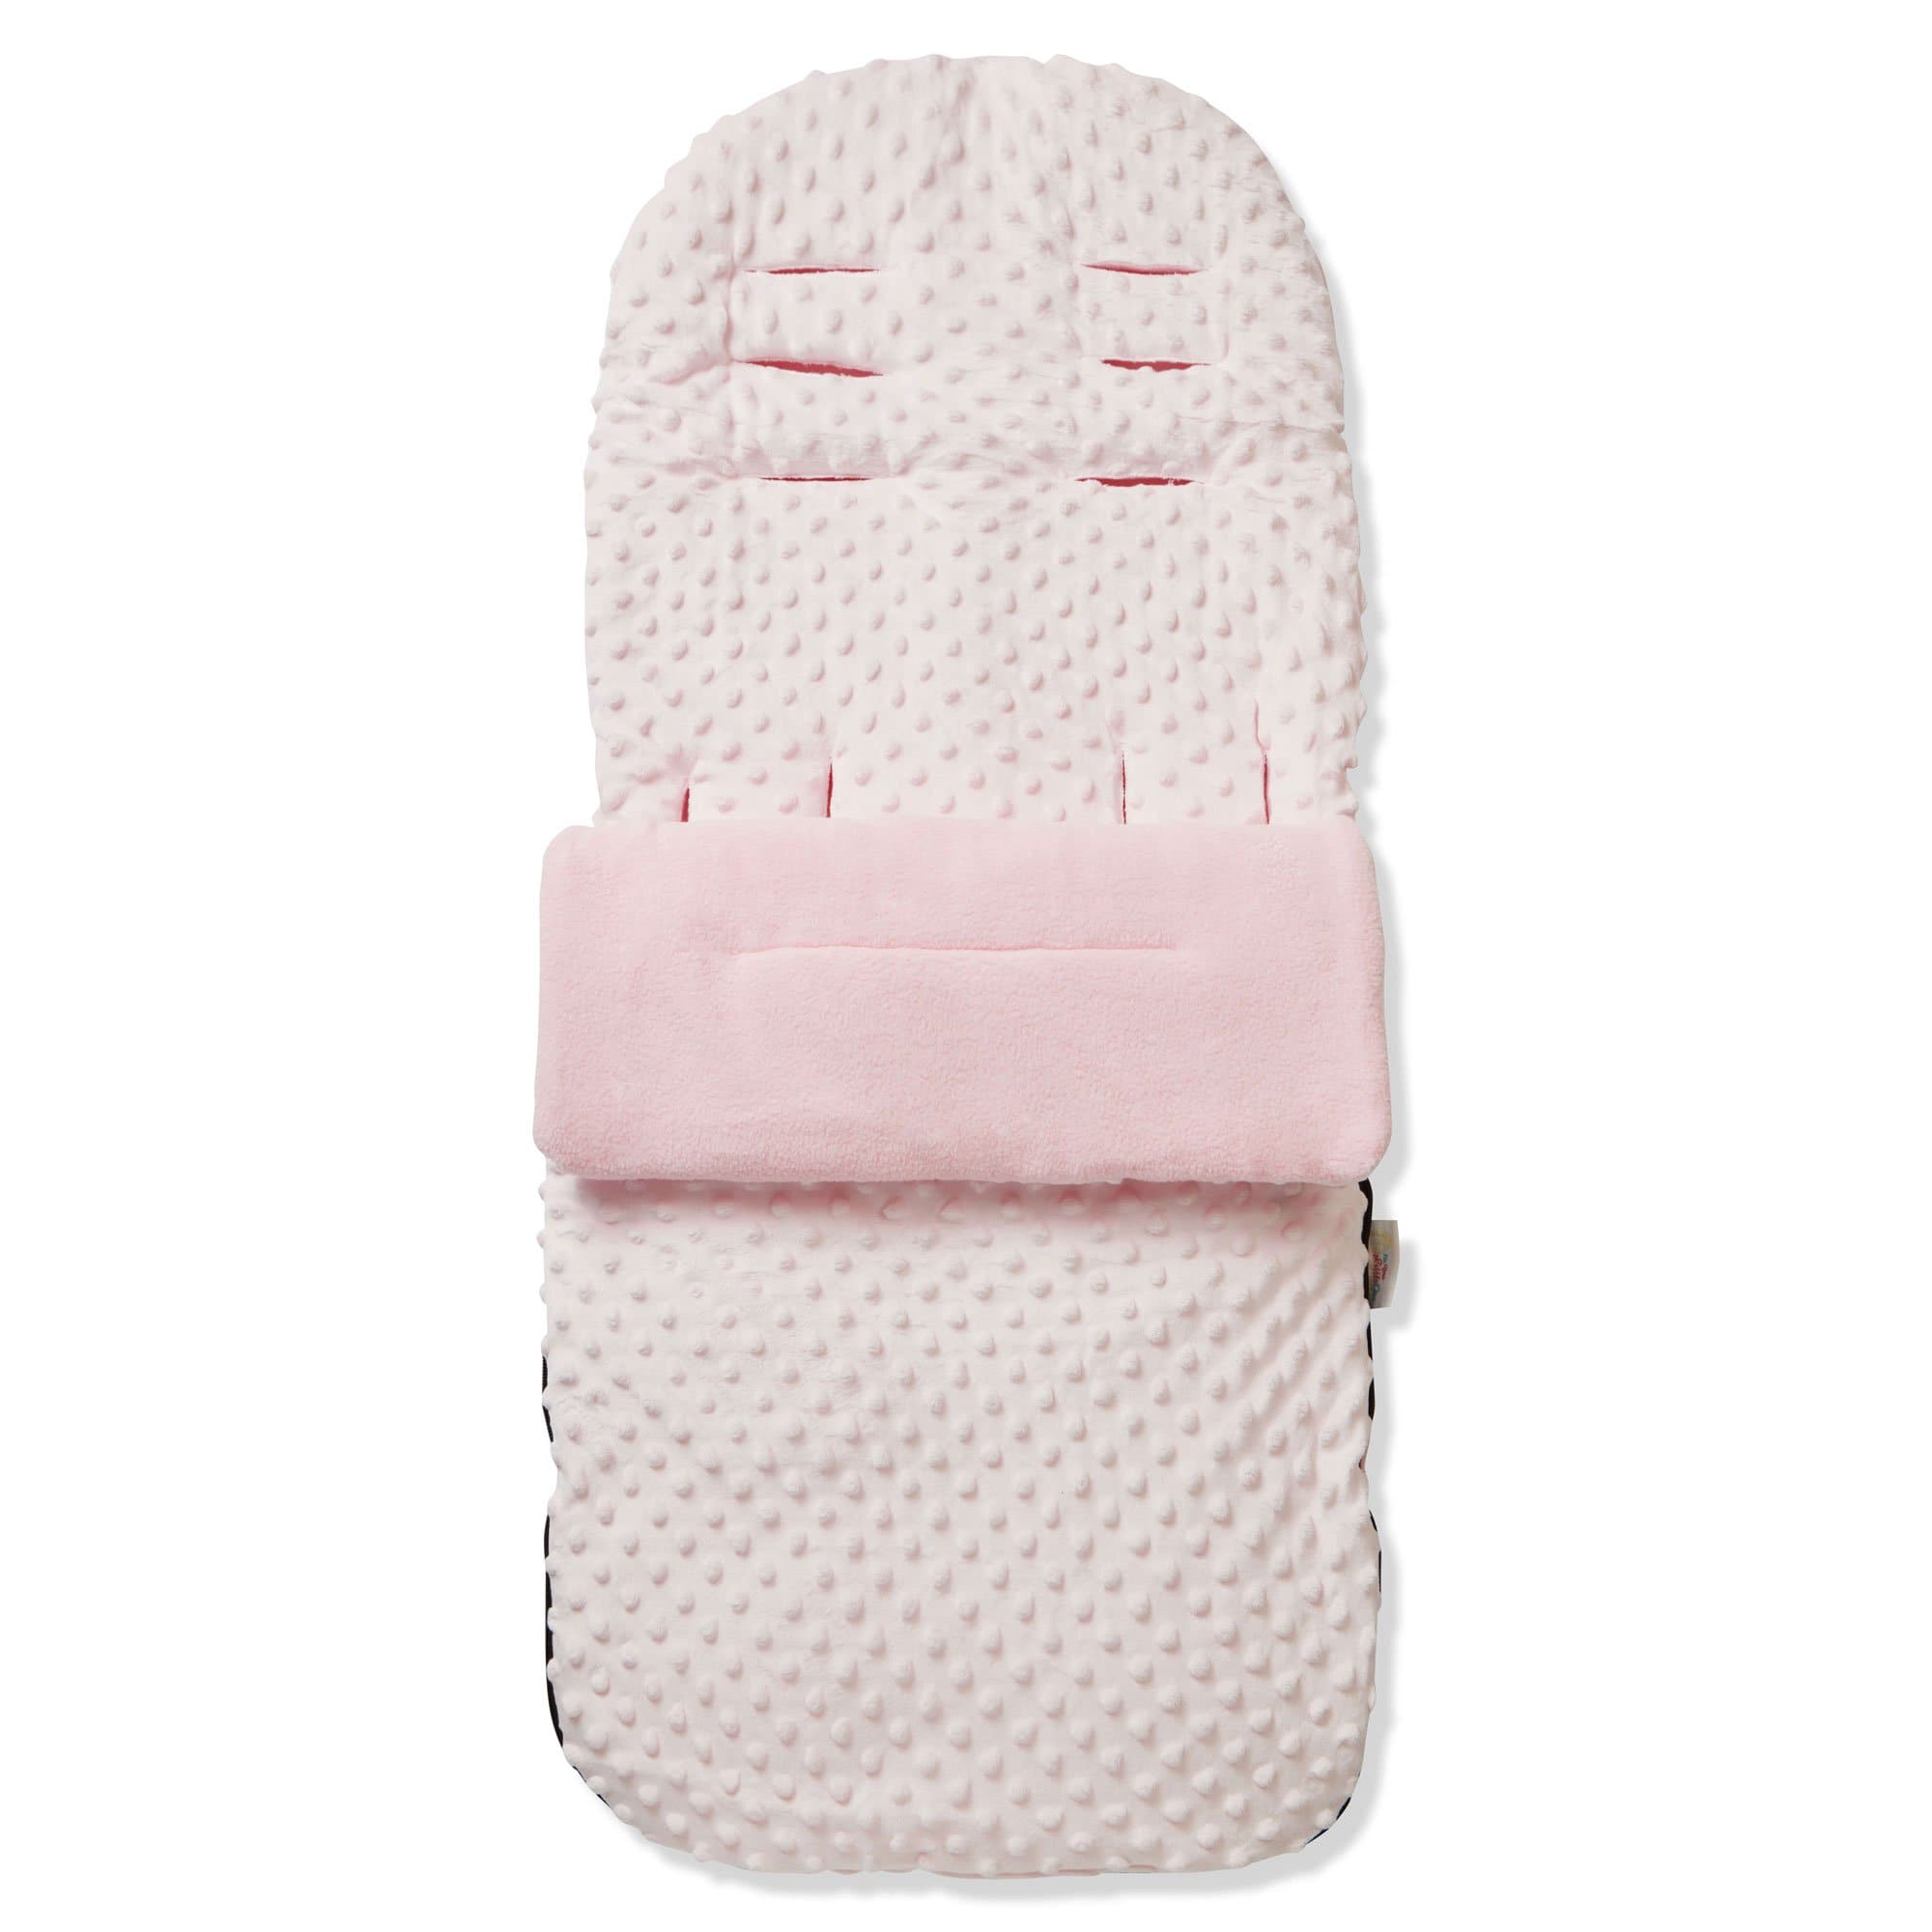 Dimple Footmuff / Cosy Toes Compatible with Bebe 9 - Pink / Fits All Models | For Your Little One